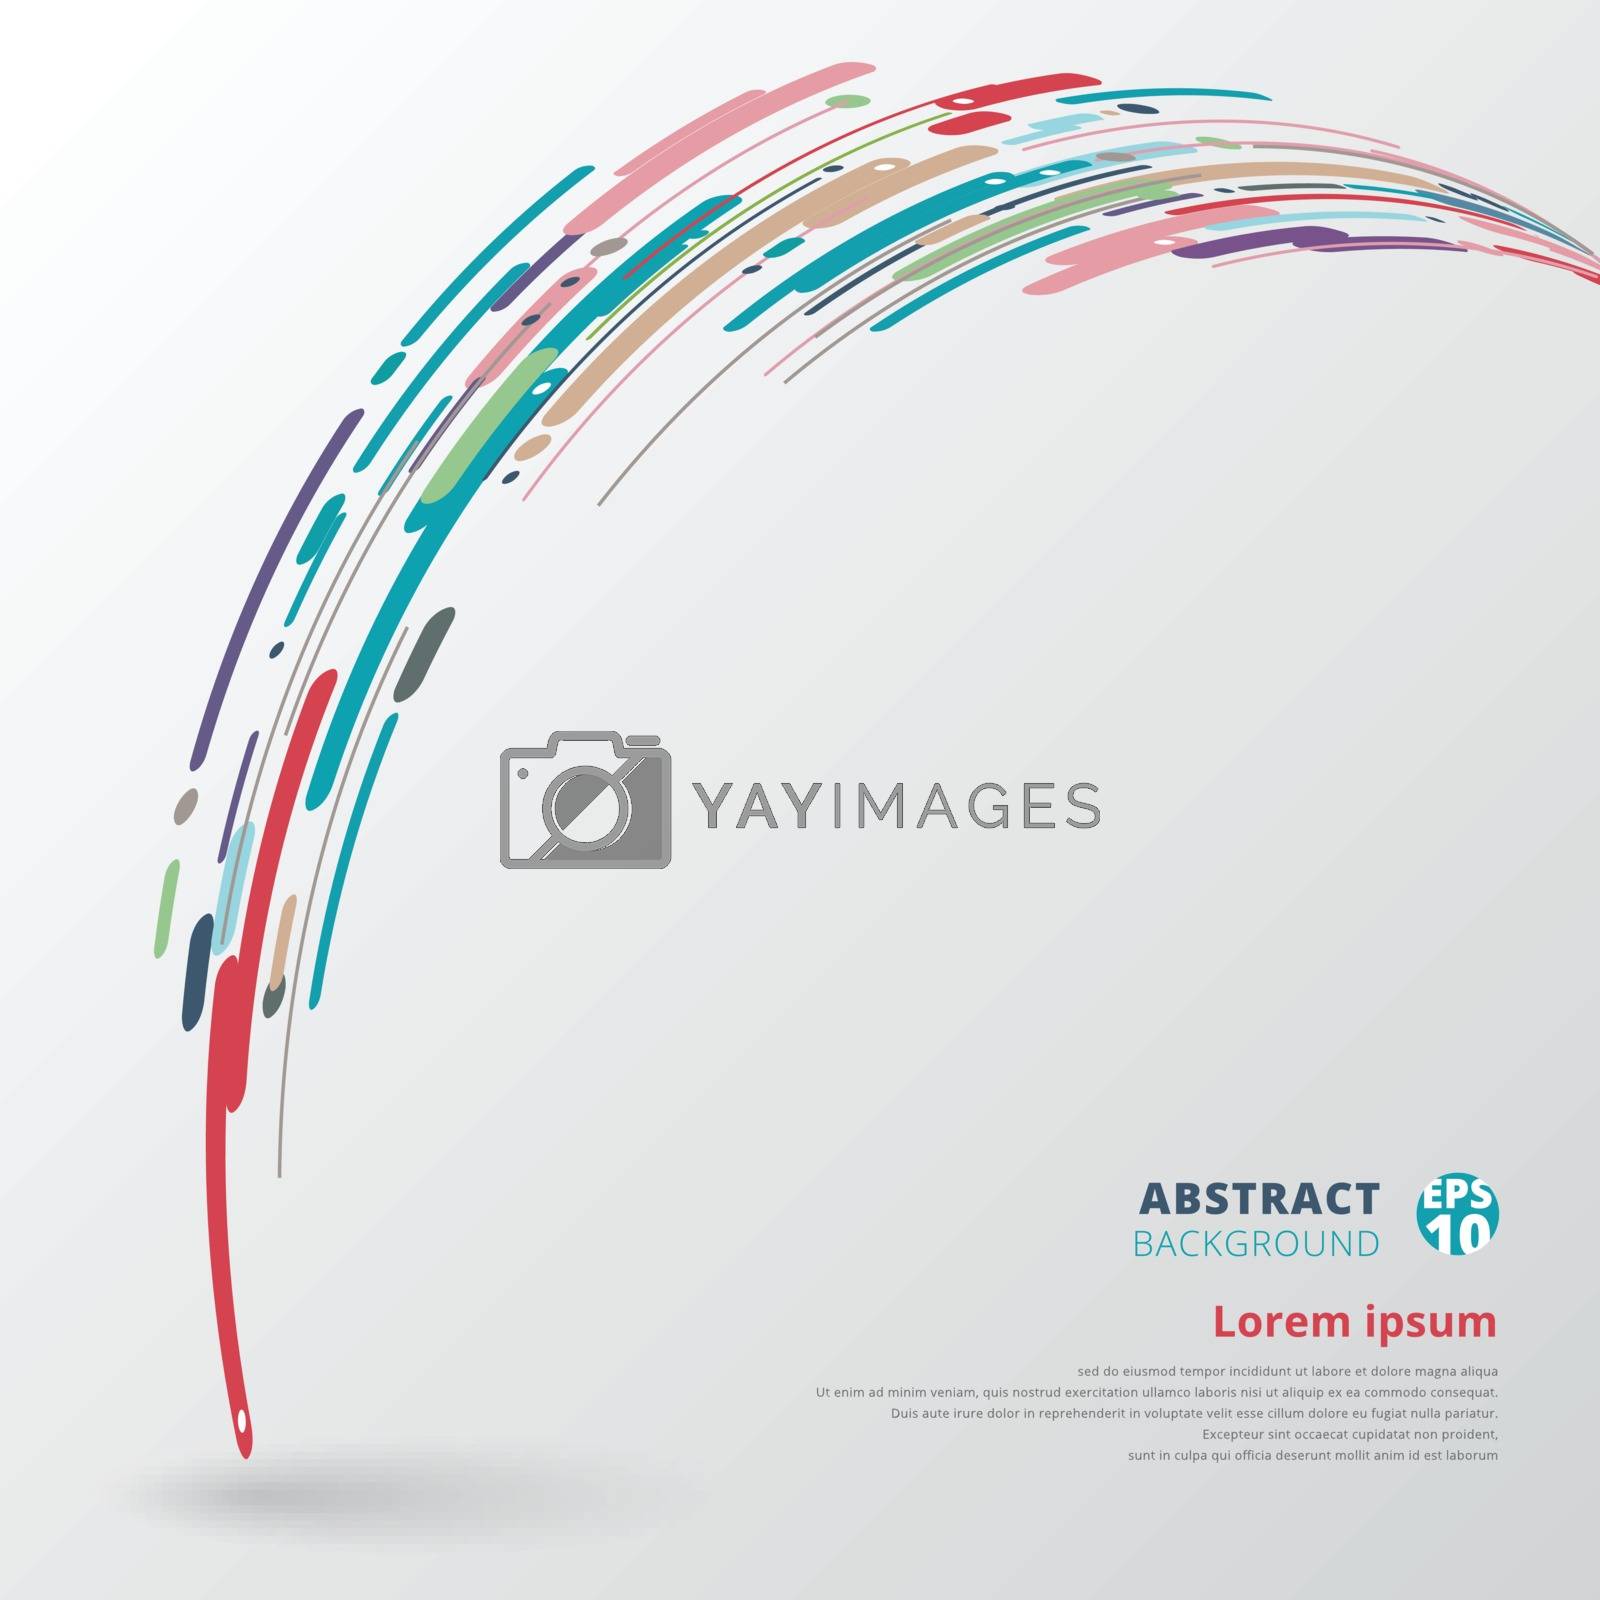 Royalty free image of Modern style abstract with composition made of various motion li by phochi